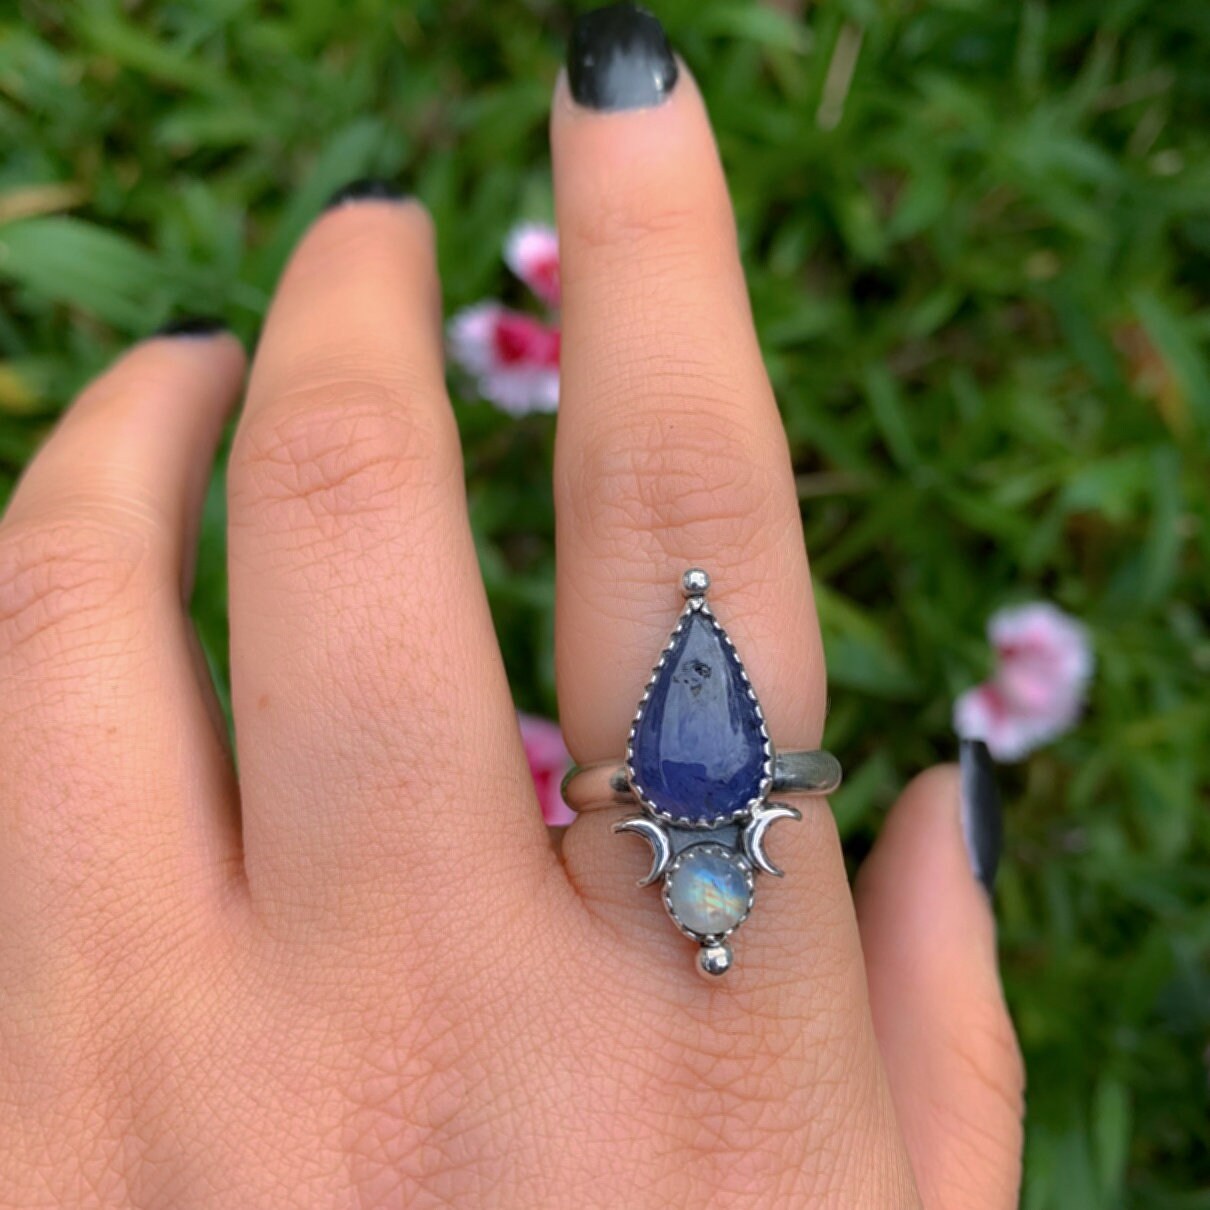 Tanzanite & Moonstone Ring - Size 7 to 7 1/4 - Sterling Silver -Teardrop Tanzanite Ring - Crescent Moon Ring, Double Stone Ring, Multi Stone